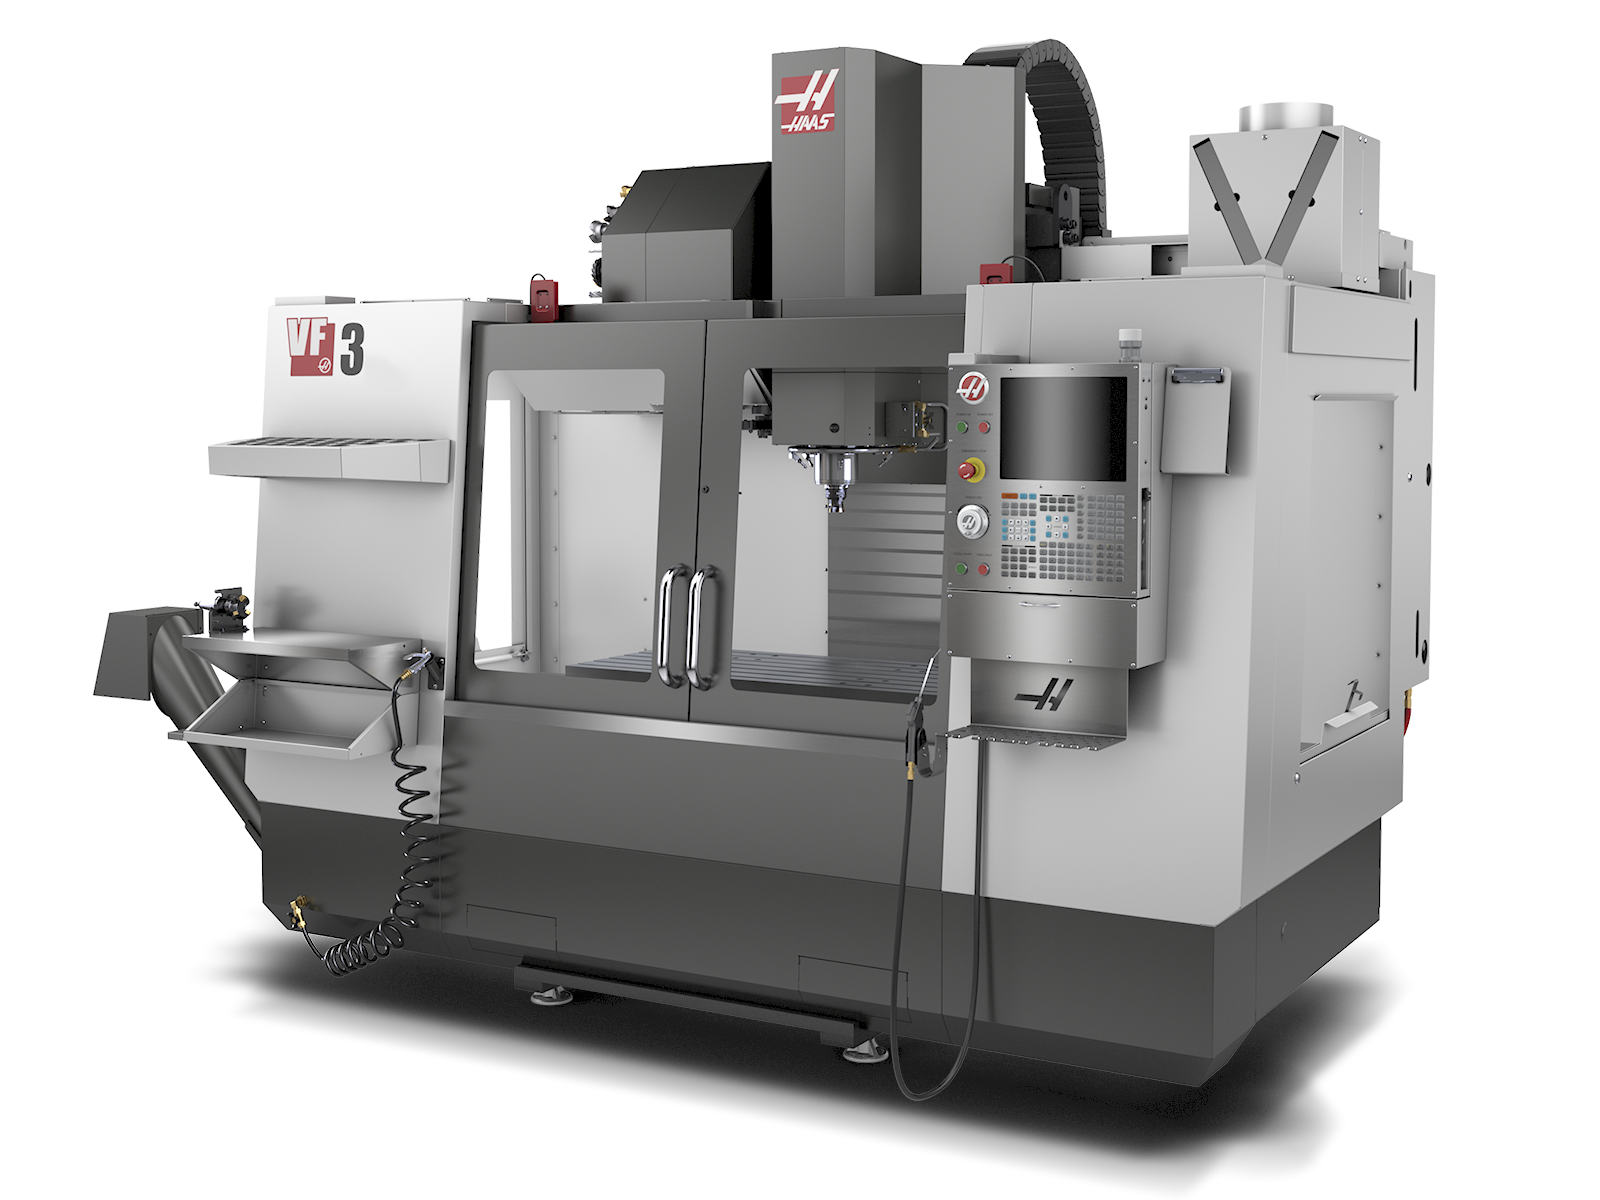 The Haas VF-3: A 40-Taper Mill for High-Performance Machining